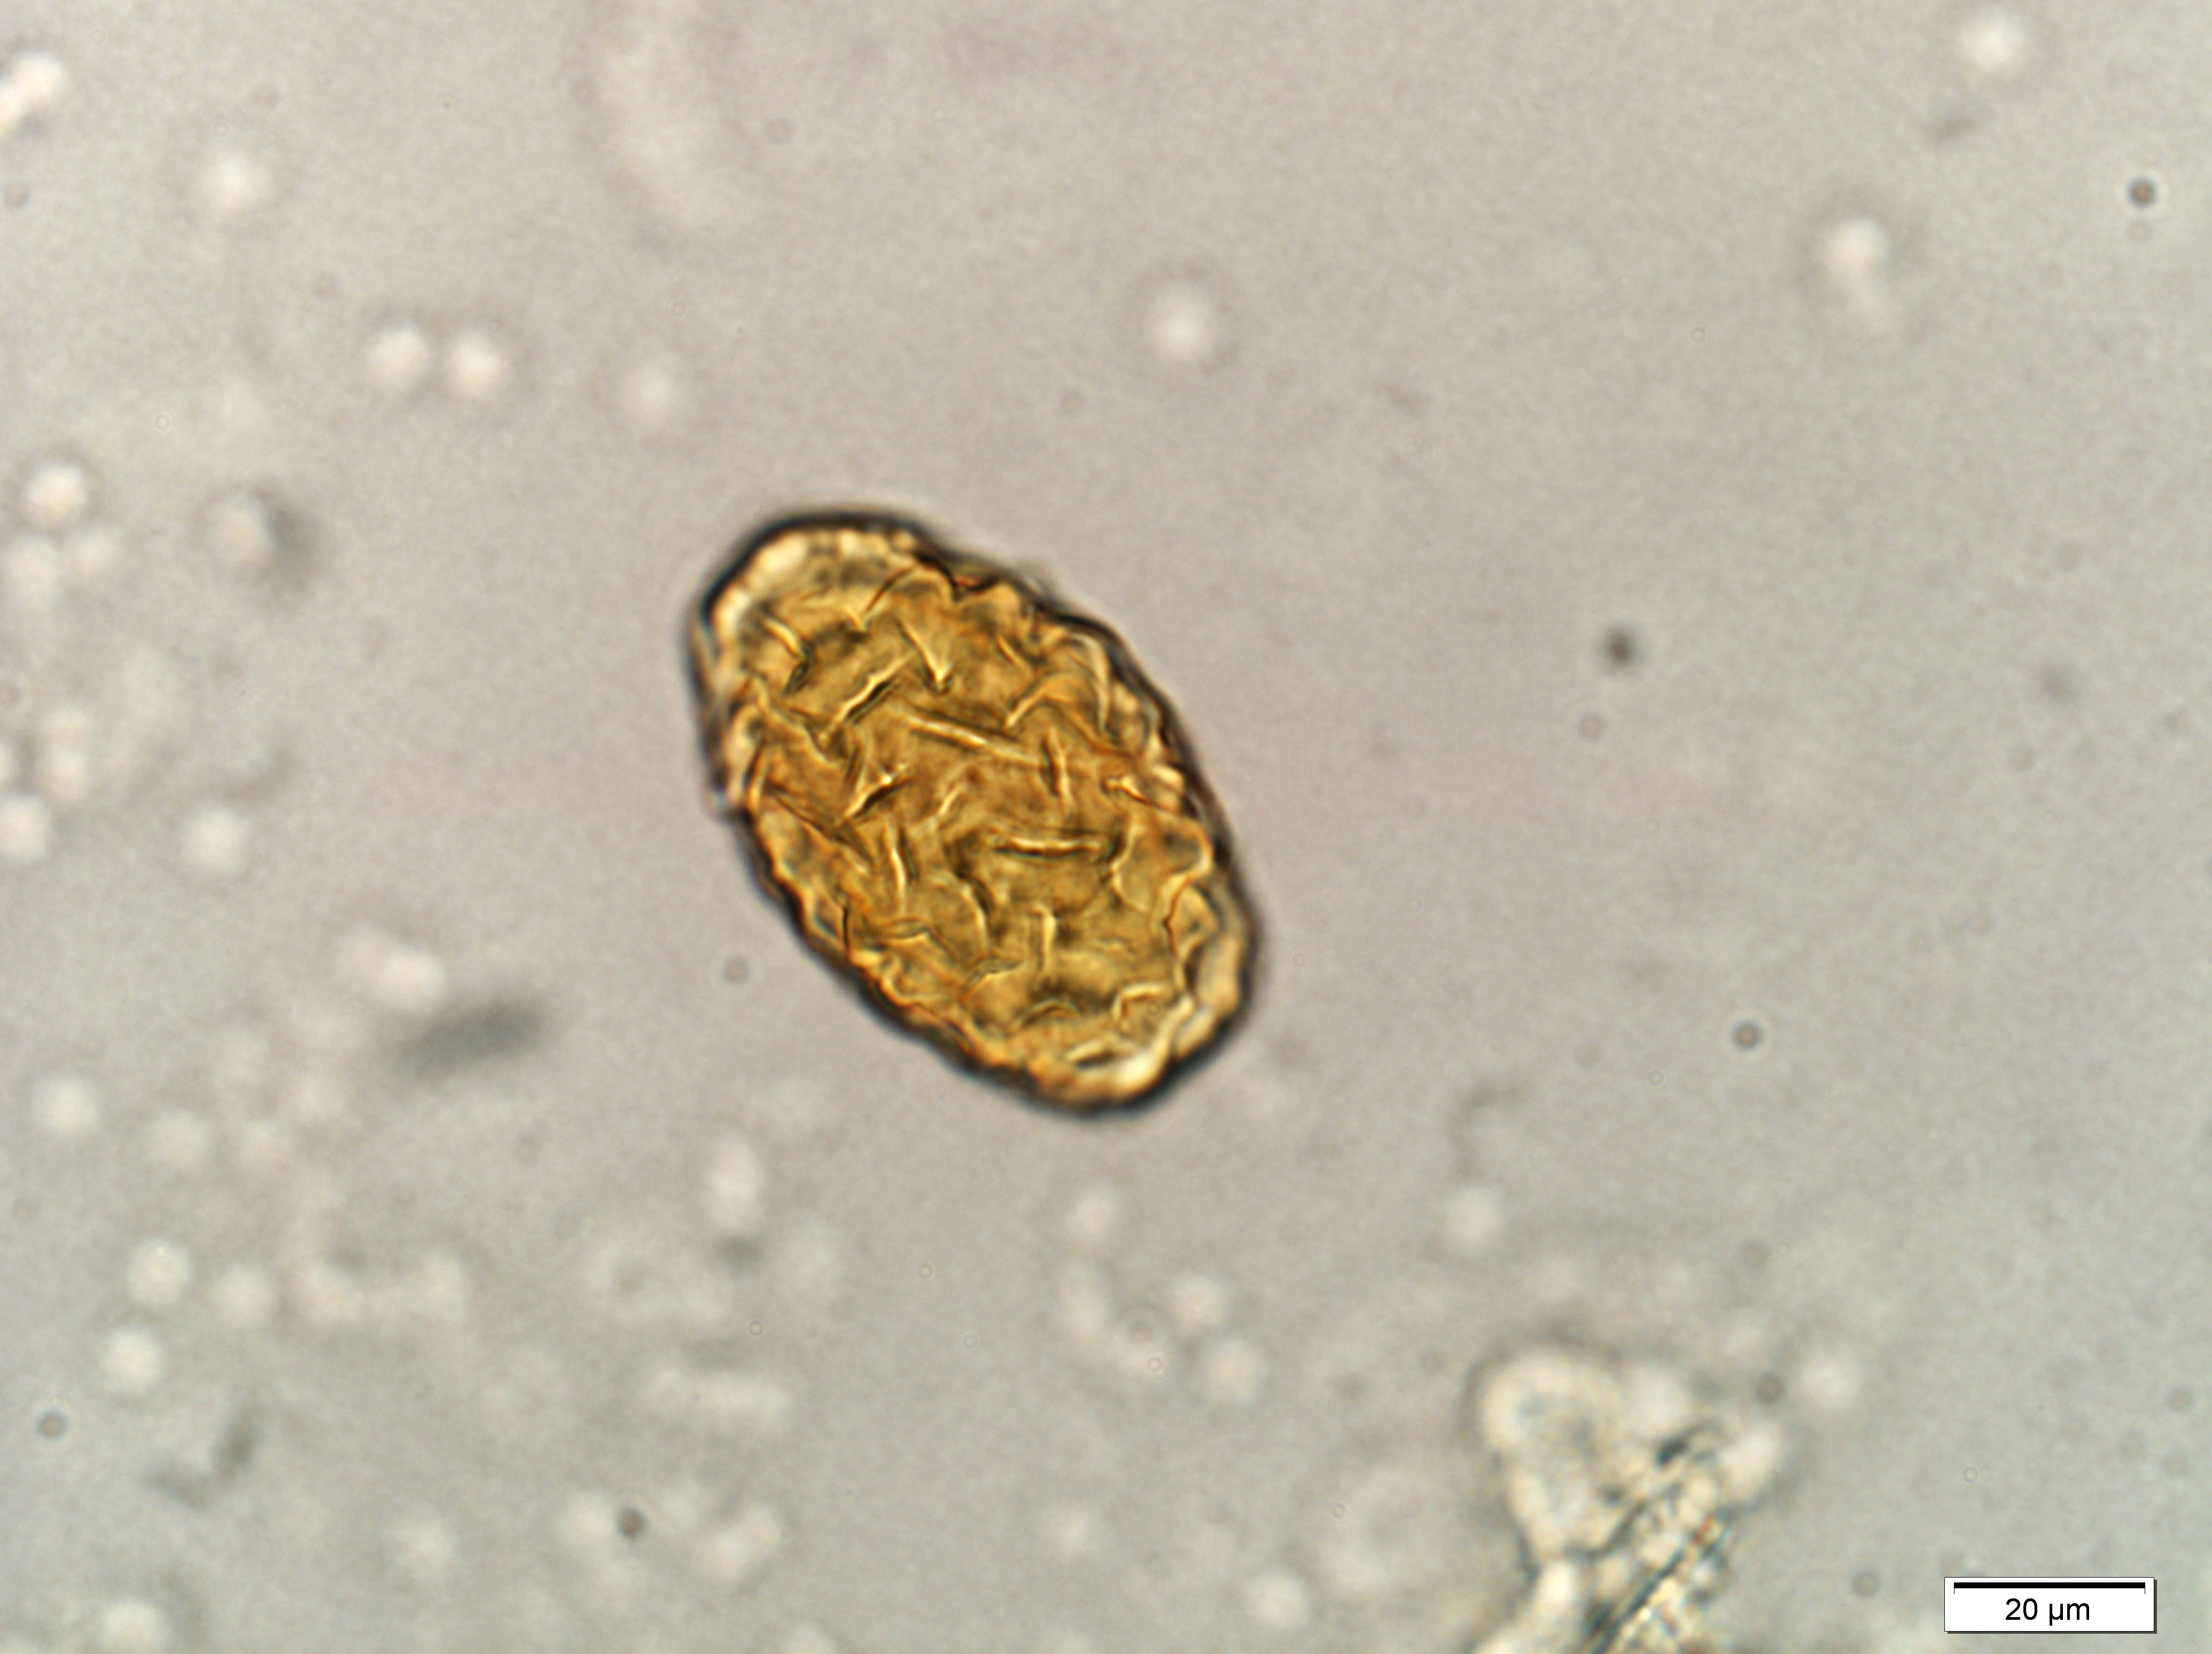 dioctophyma-egg-pitted-shell-2021.jpg